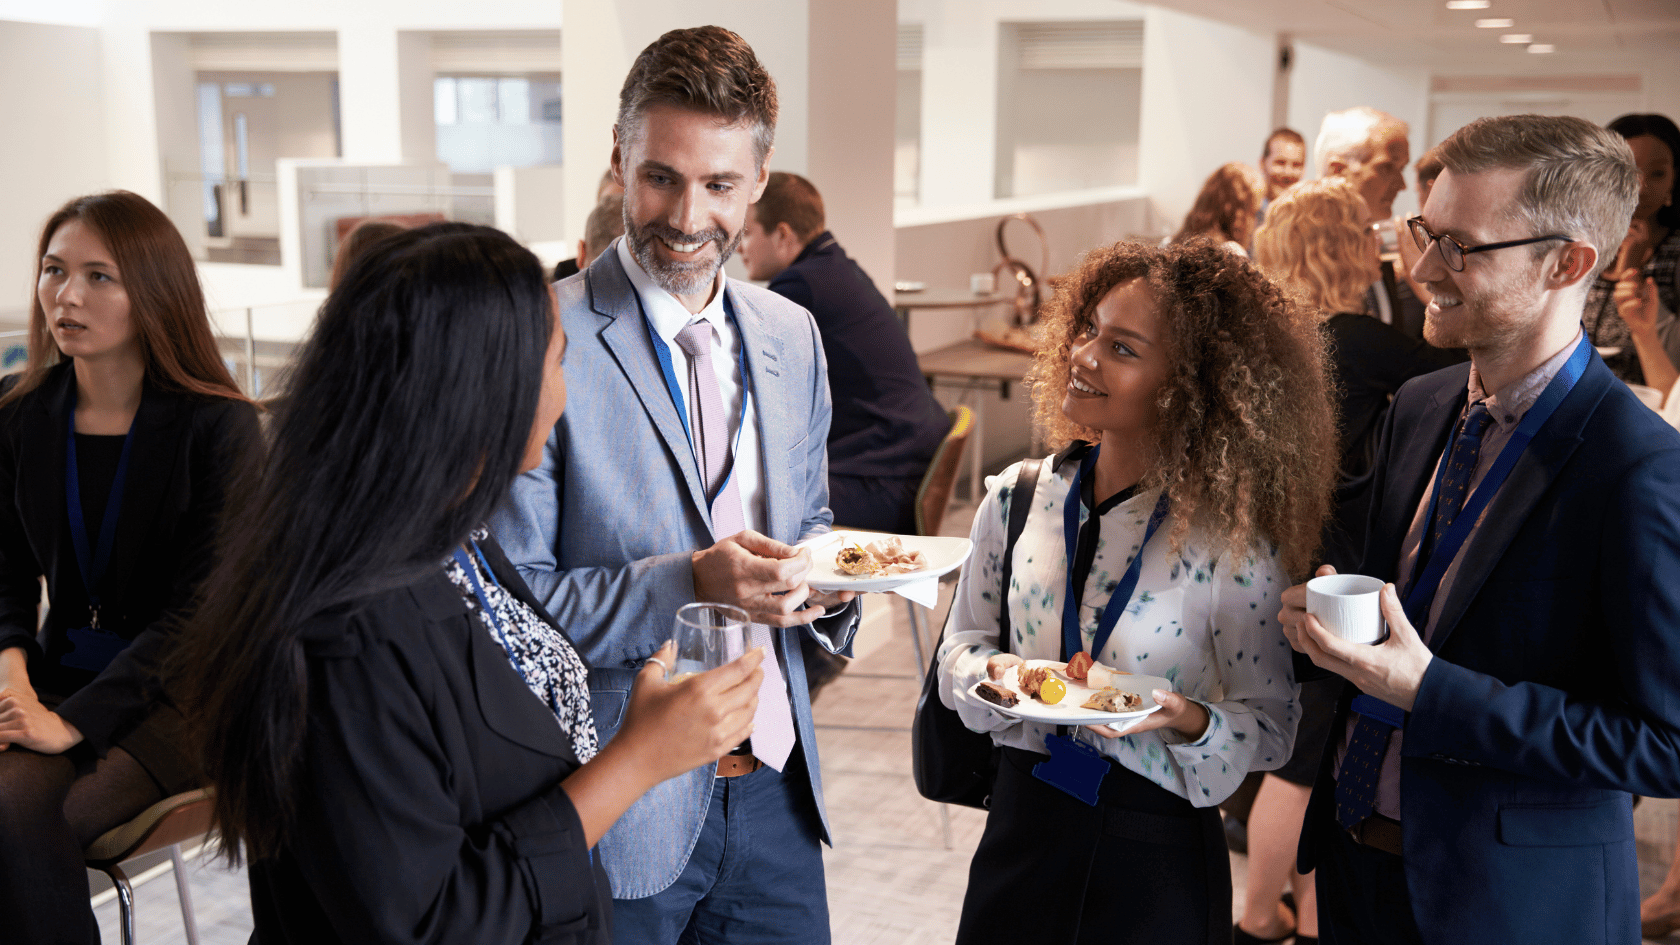 4 Ways to Maximize Networking at a Real Estate Conference